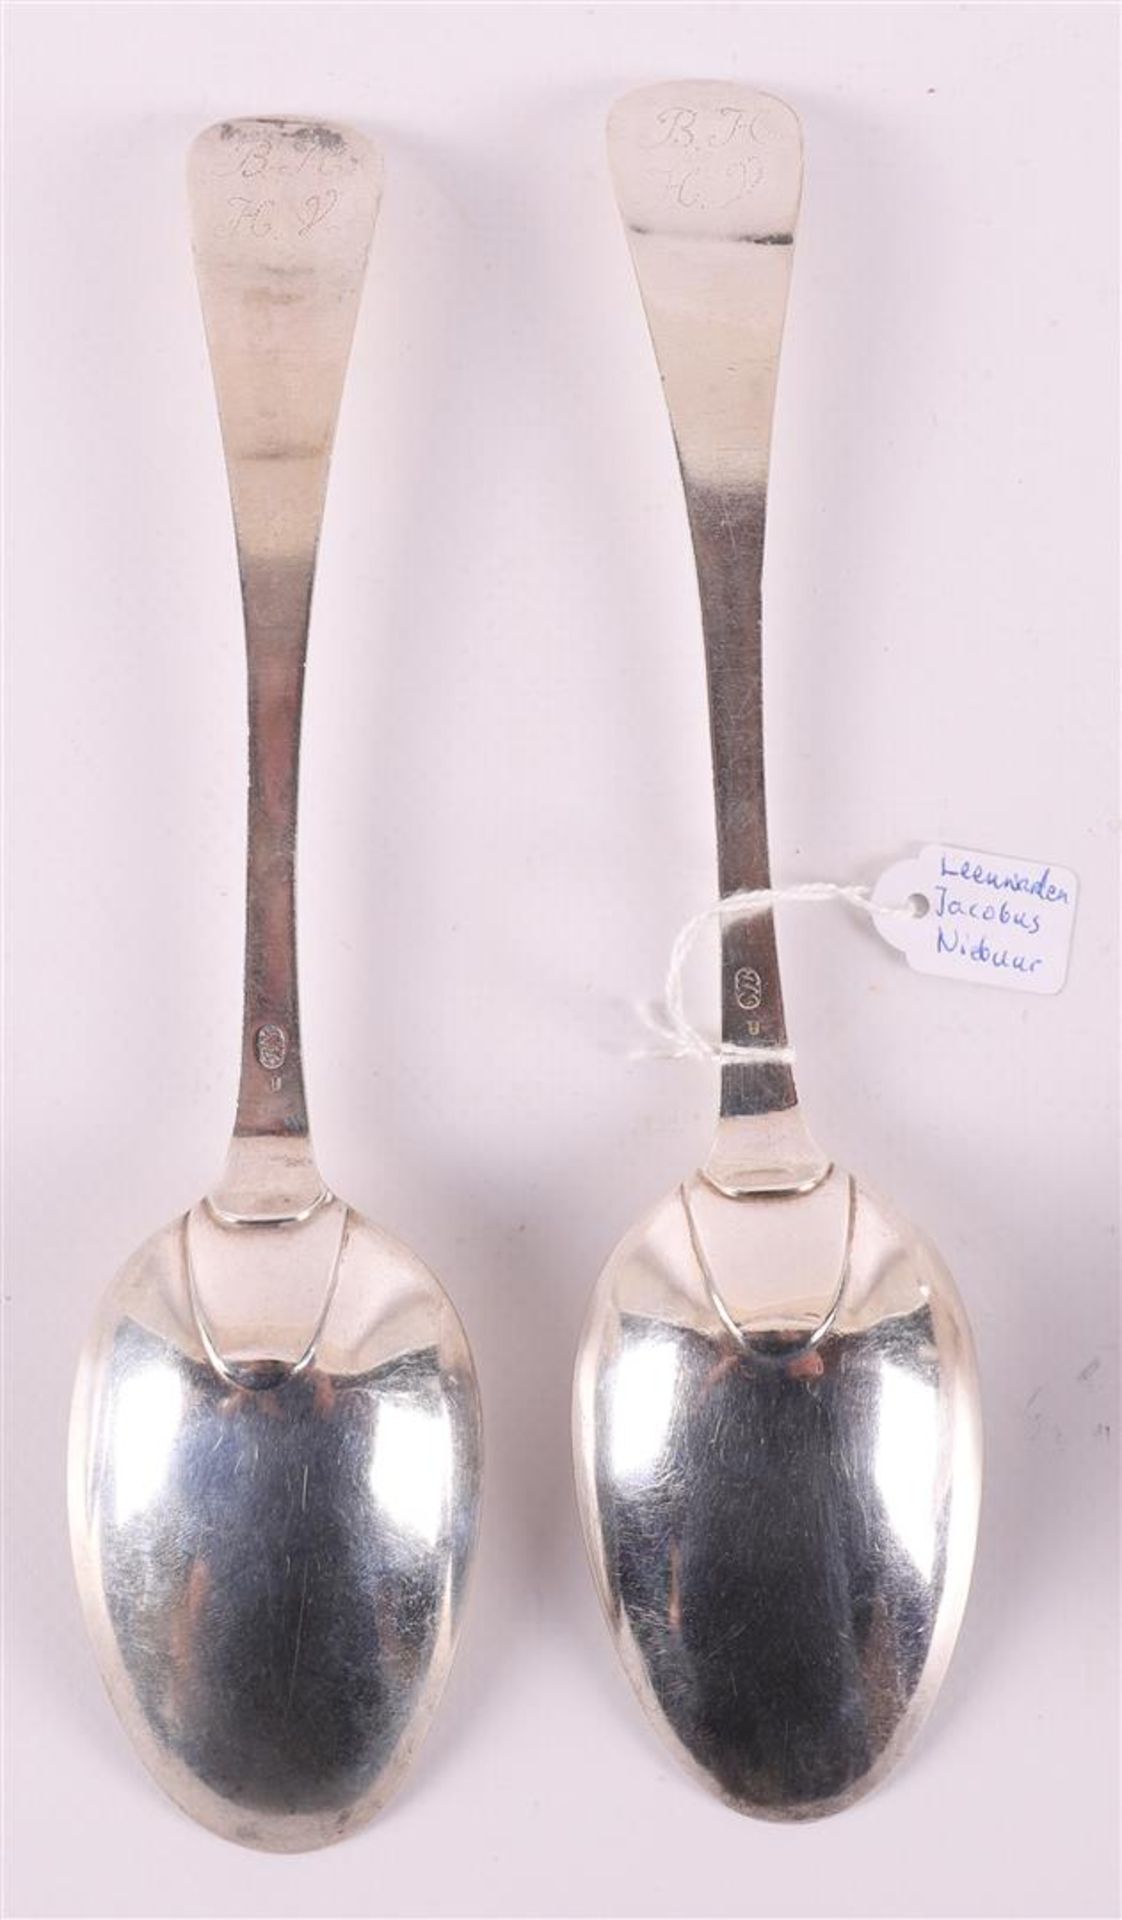 Four first grade content 925/1000 silver spoons, Friesland, Leeuwarden, - Image 5 of 7